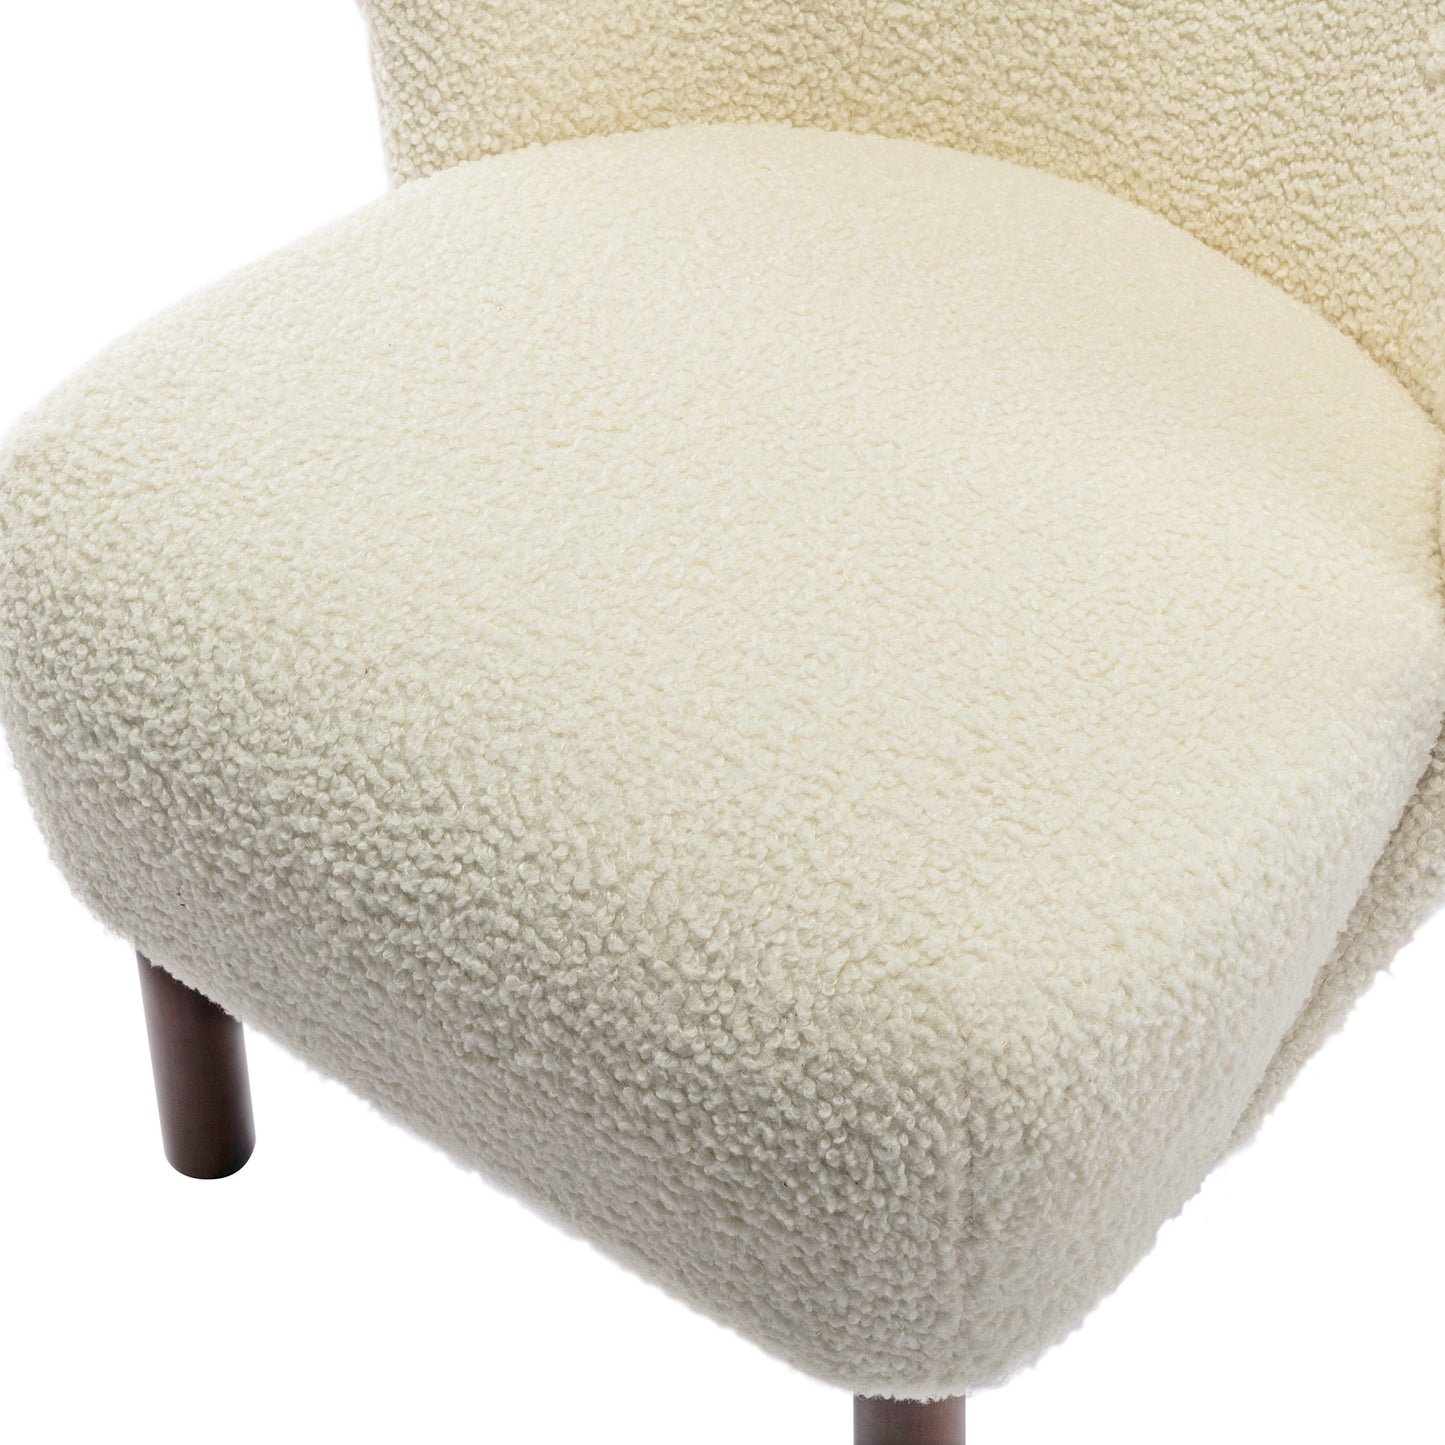 Tufted Side Chair with Solid Wood Legs for Living Room Bedroom Home Decor by Design